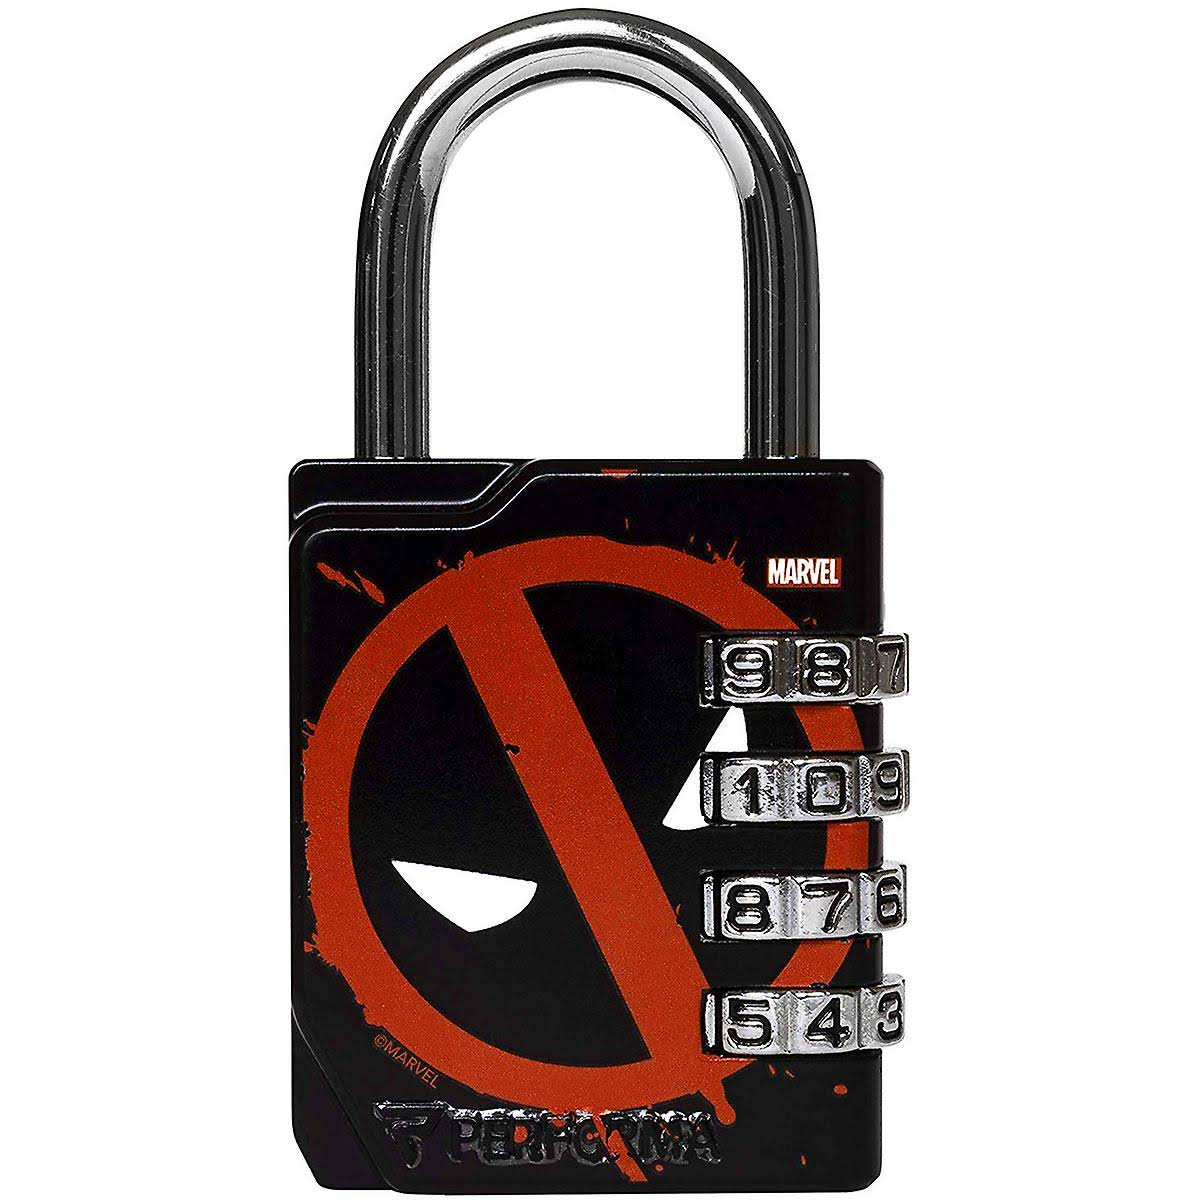 Performa Ultra Premium Embossed 4-Dial Combination Gym Lock - Deadpool One Size